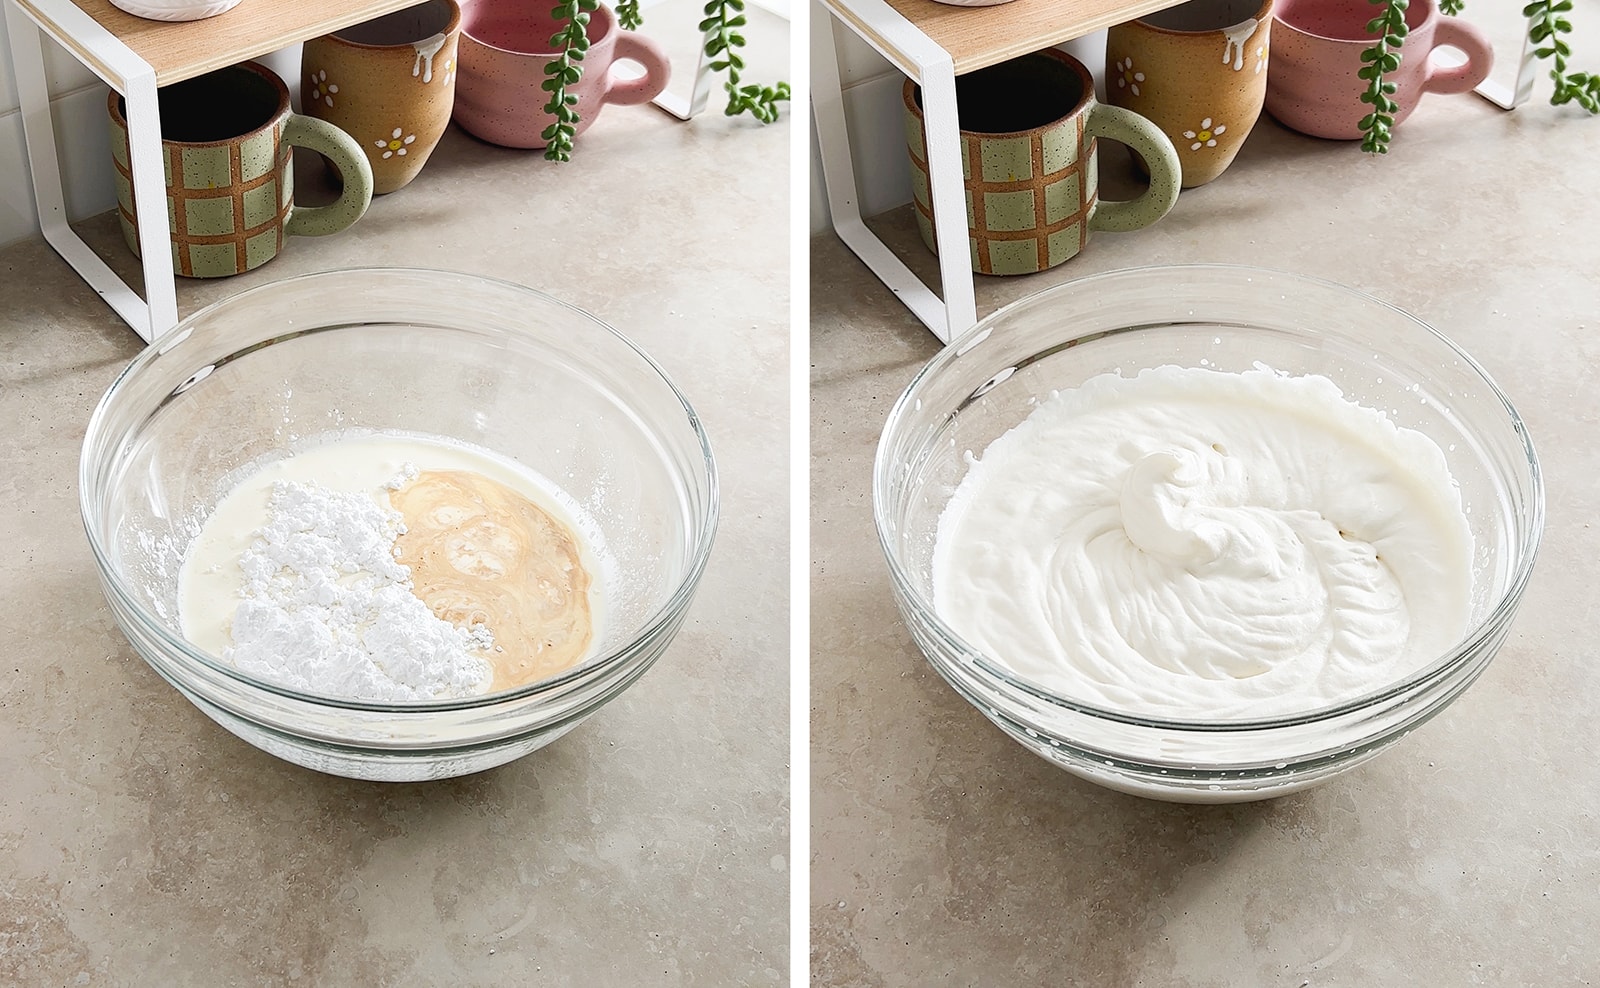 Left to right: ingredients for whipped cream in a bowl, whipped cream in mixing bowl after being whipped.